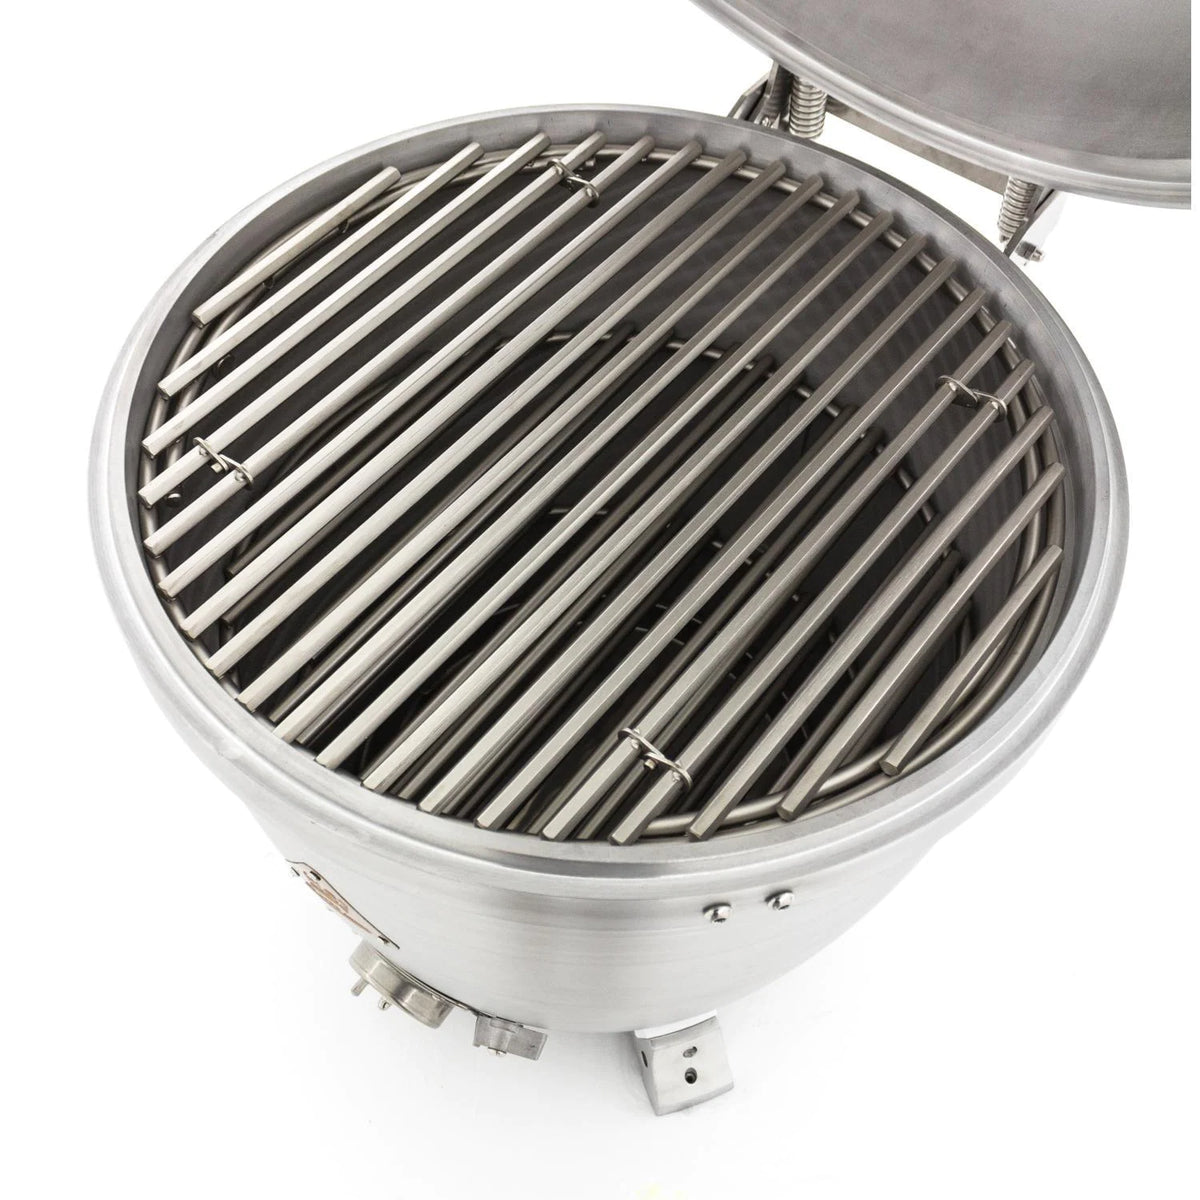 Blaze 20 Inch Cast Aluminum Kamado Stainless Steel Cooking Grate